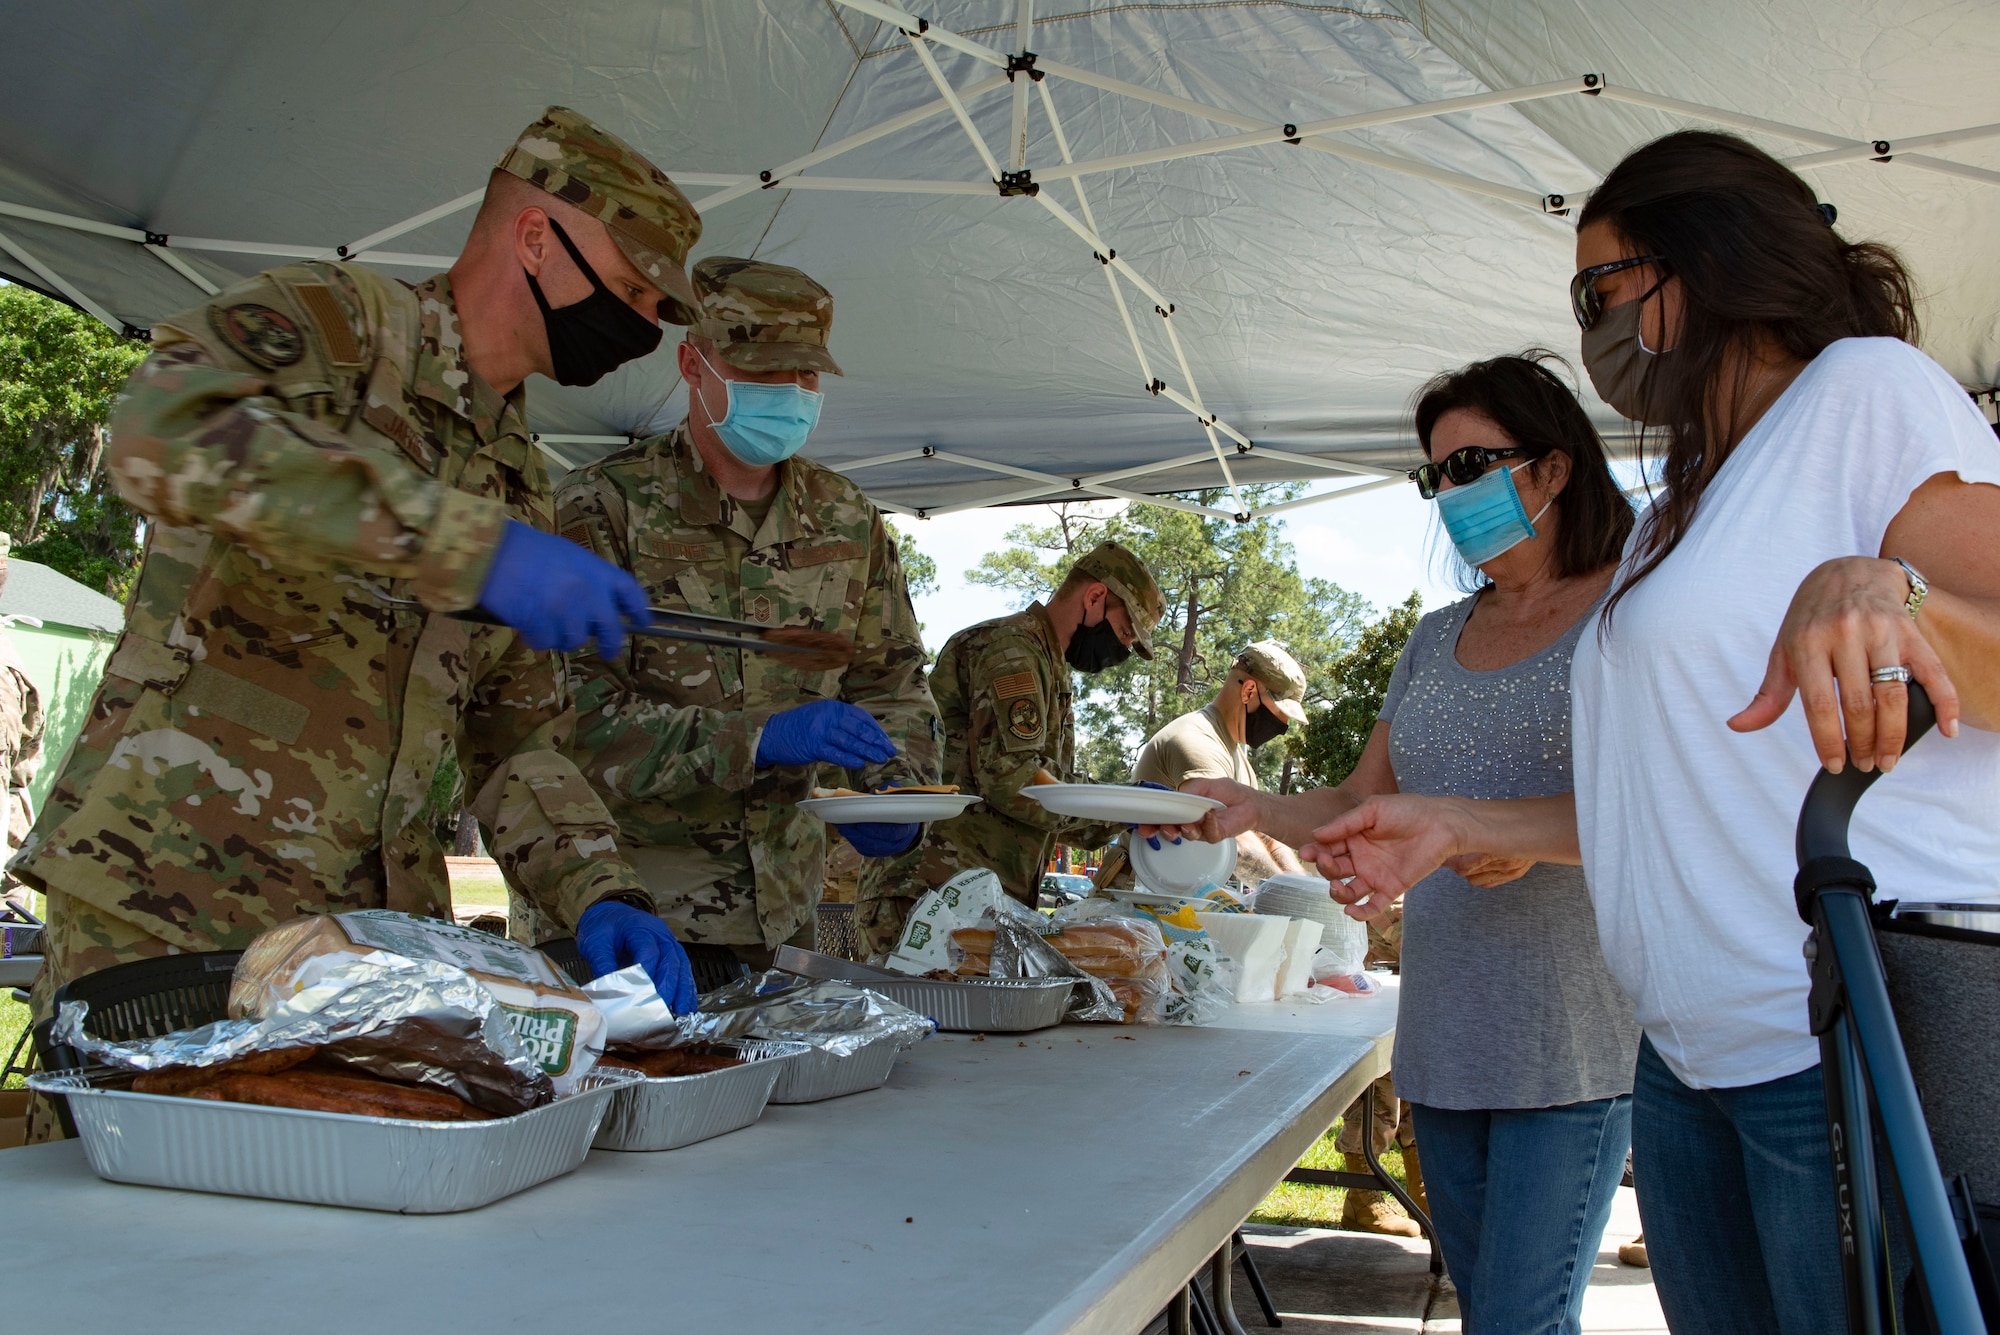 A photo of Airmen serving food to people.